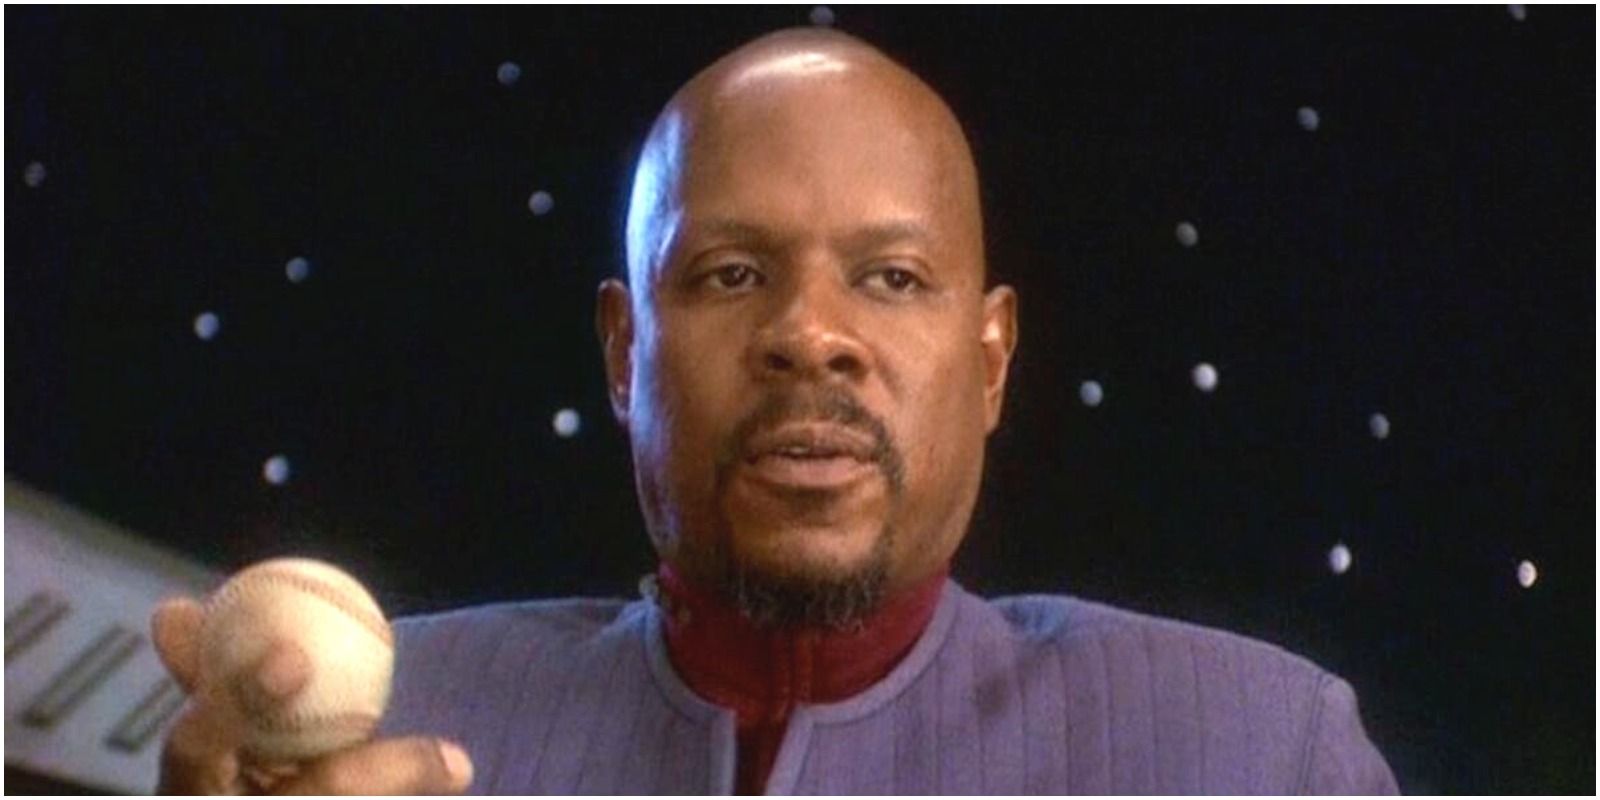 Captain Sisko aboard DS9 with his infamous baseball